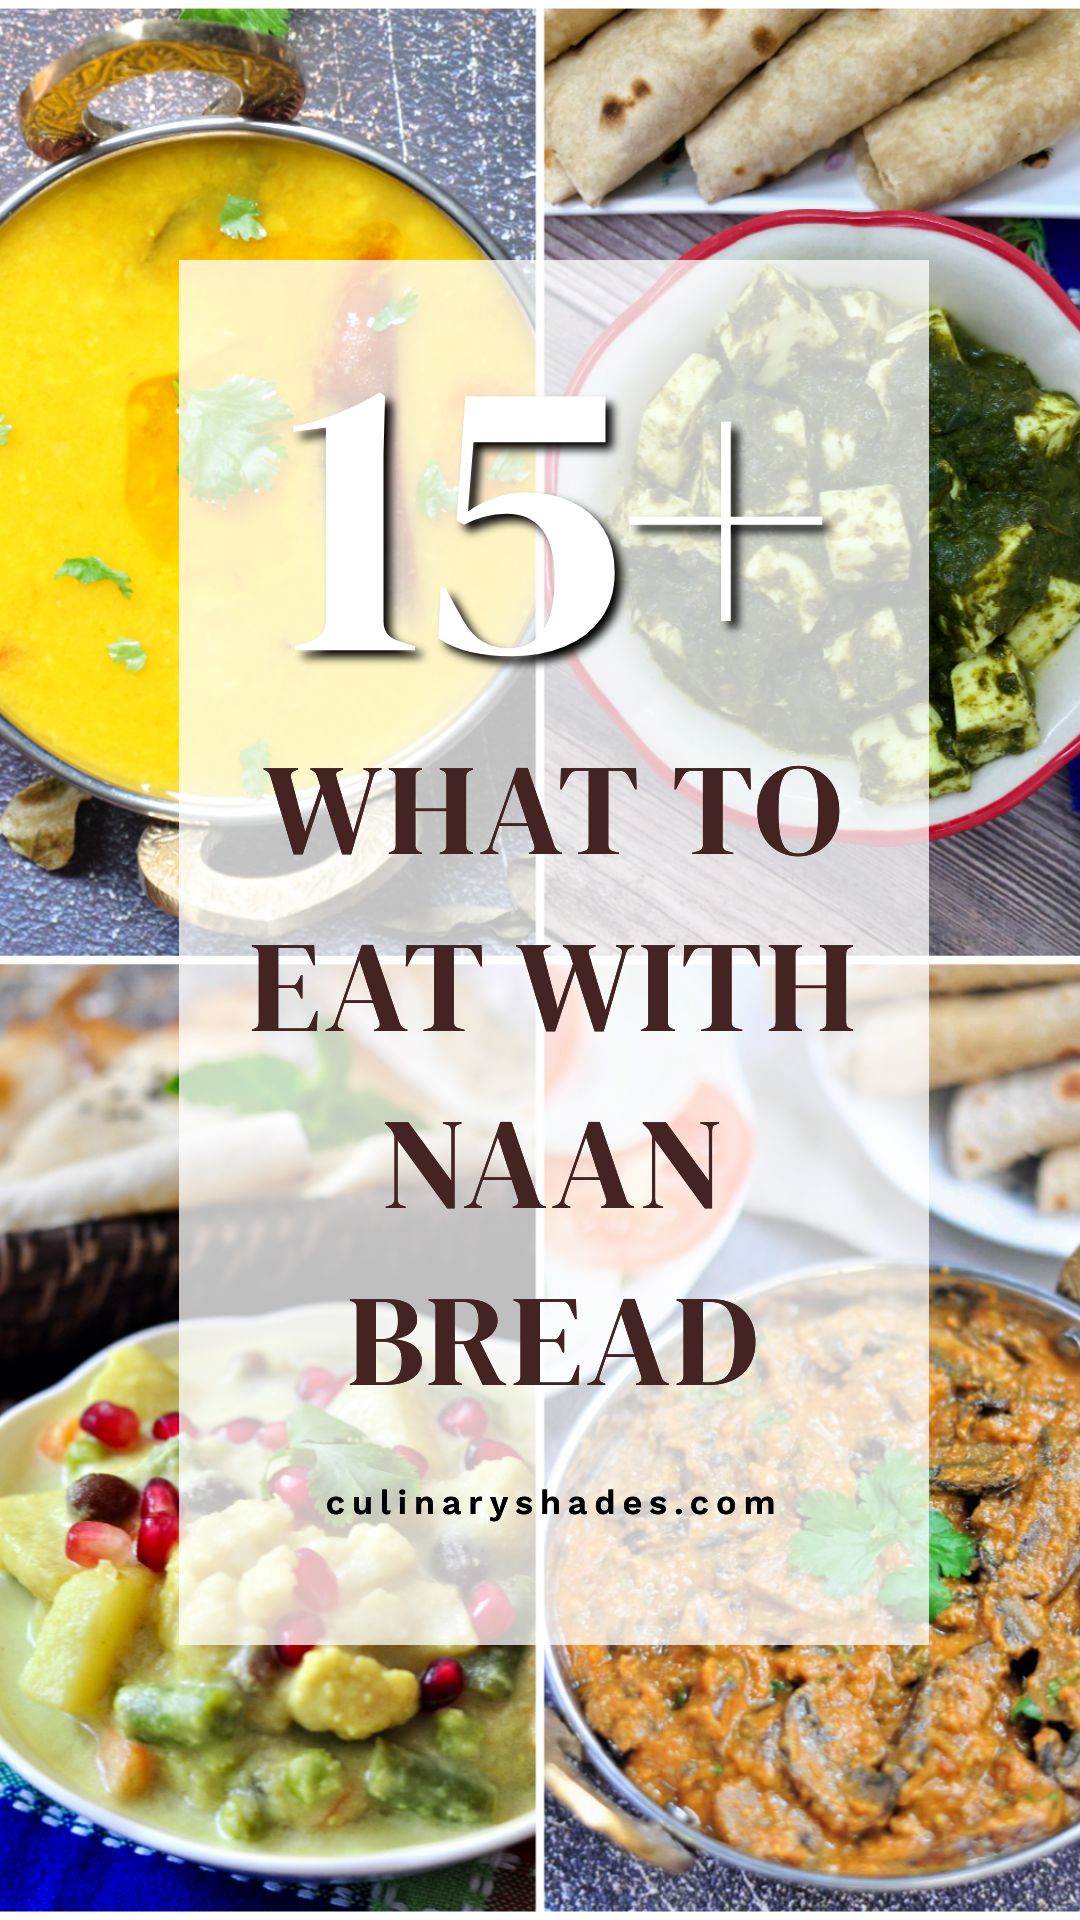 What to eat with naan bread collage.